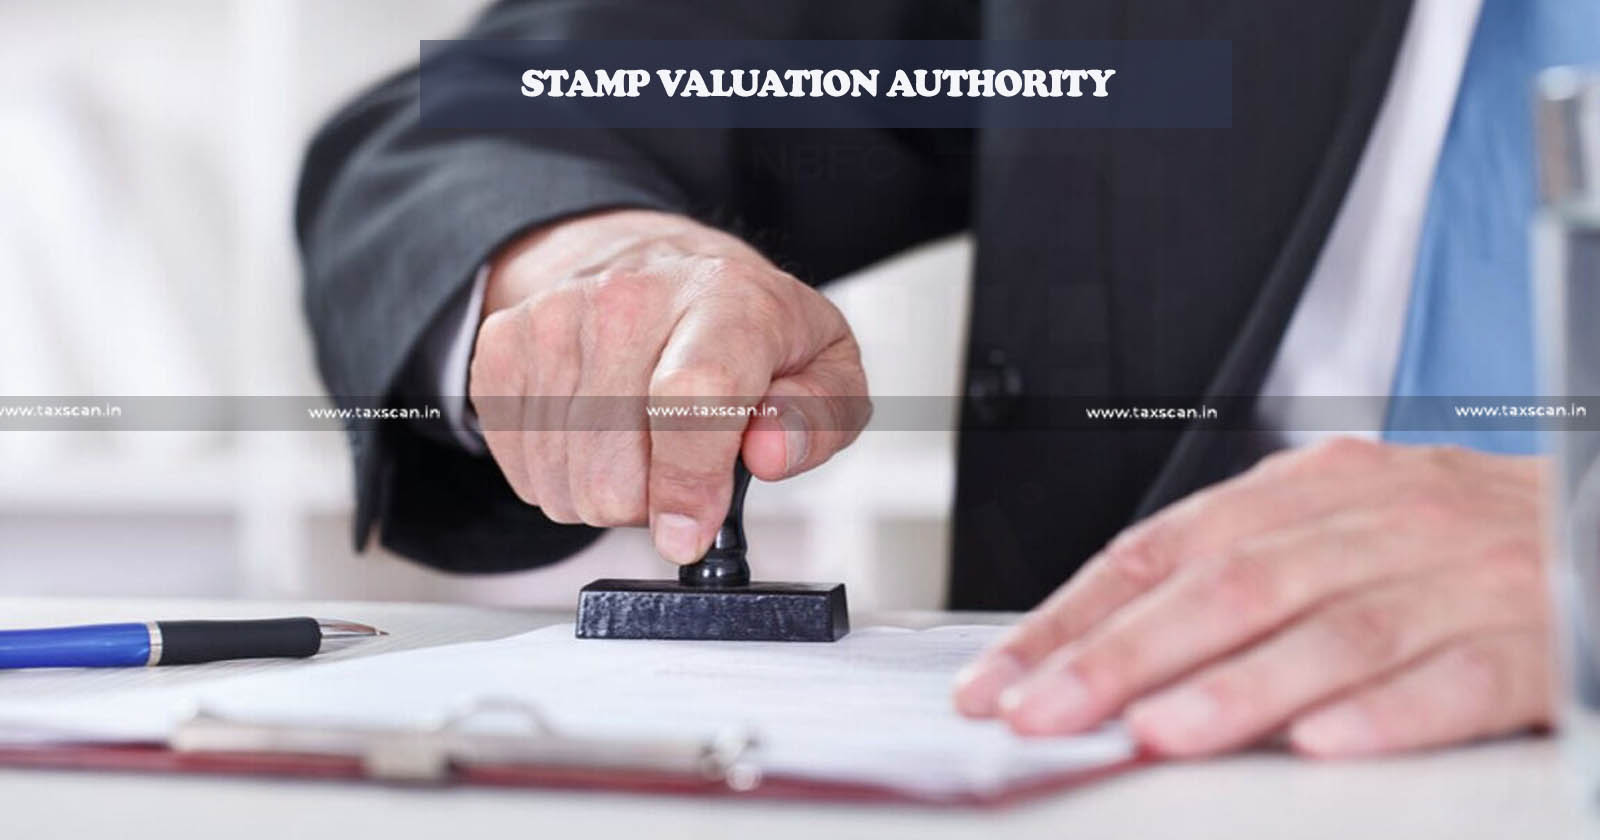 Value - Stamp -Valuation -Authority - Full -Value - Consideration -Calculating -Capital -Delhi -HC -Condemns- Act - PCIT - Stamping- Attempt - AO - Reopen -Assessment-tacscan